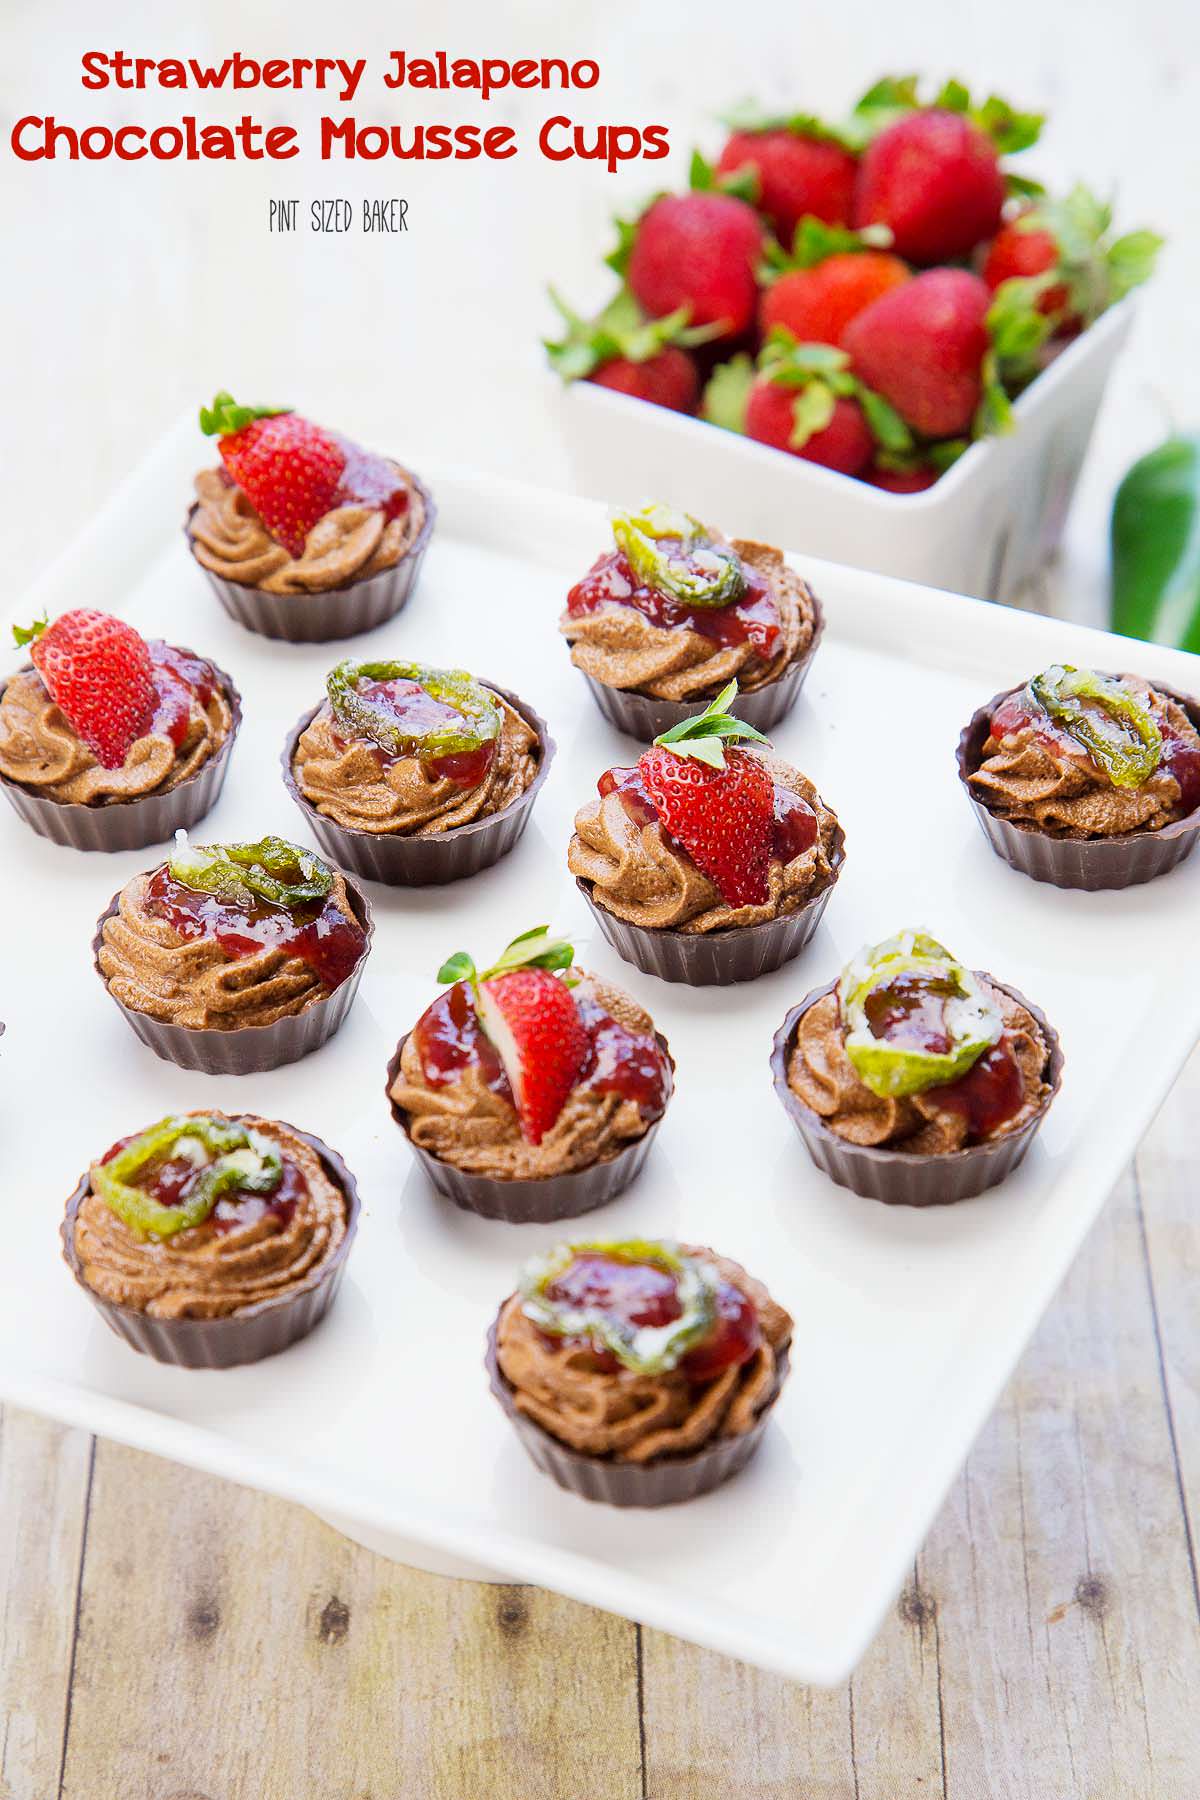 Strawberry Jalapeno Chocolate Mousse Cups have a bit of a kick to the taste buds. The sweet heat is a little jolt to the system.